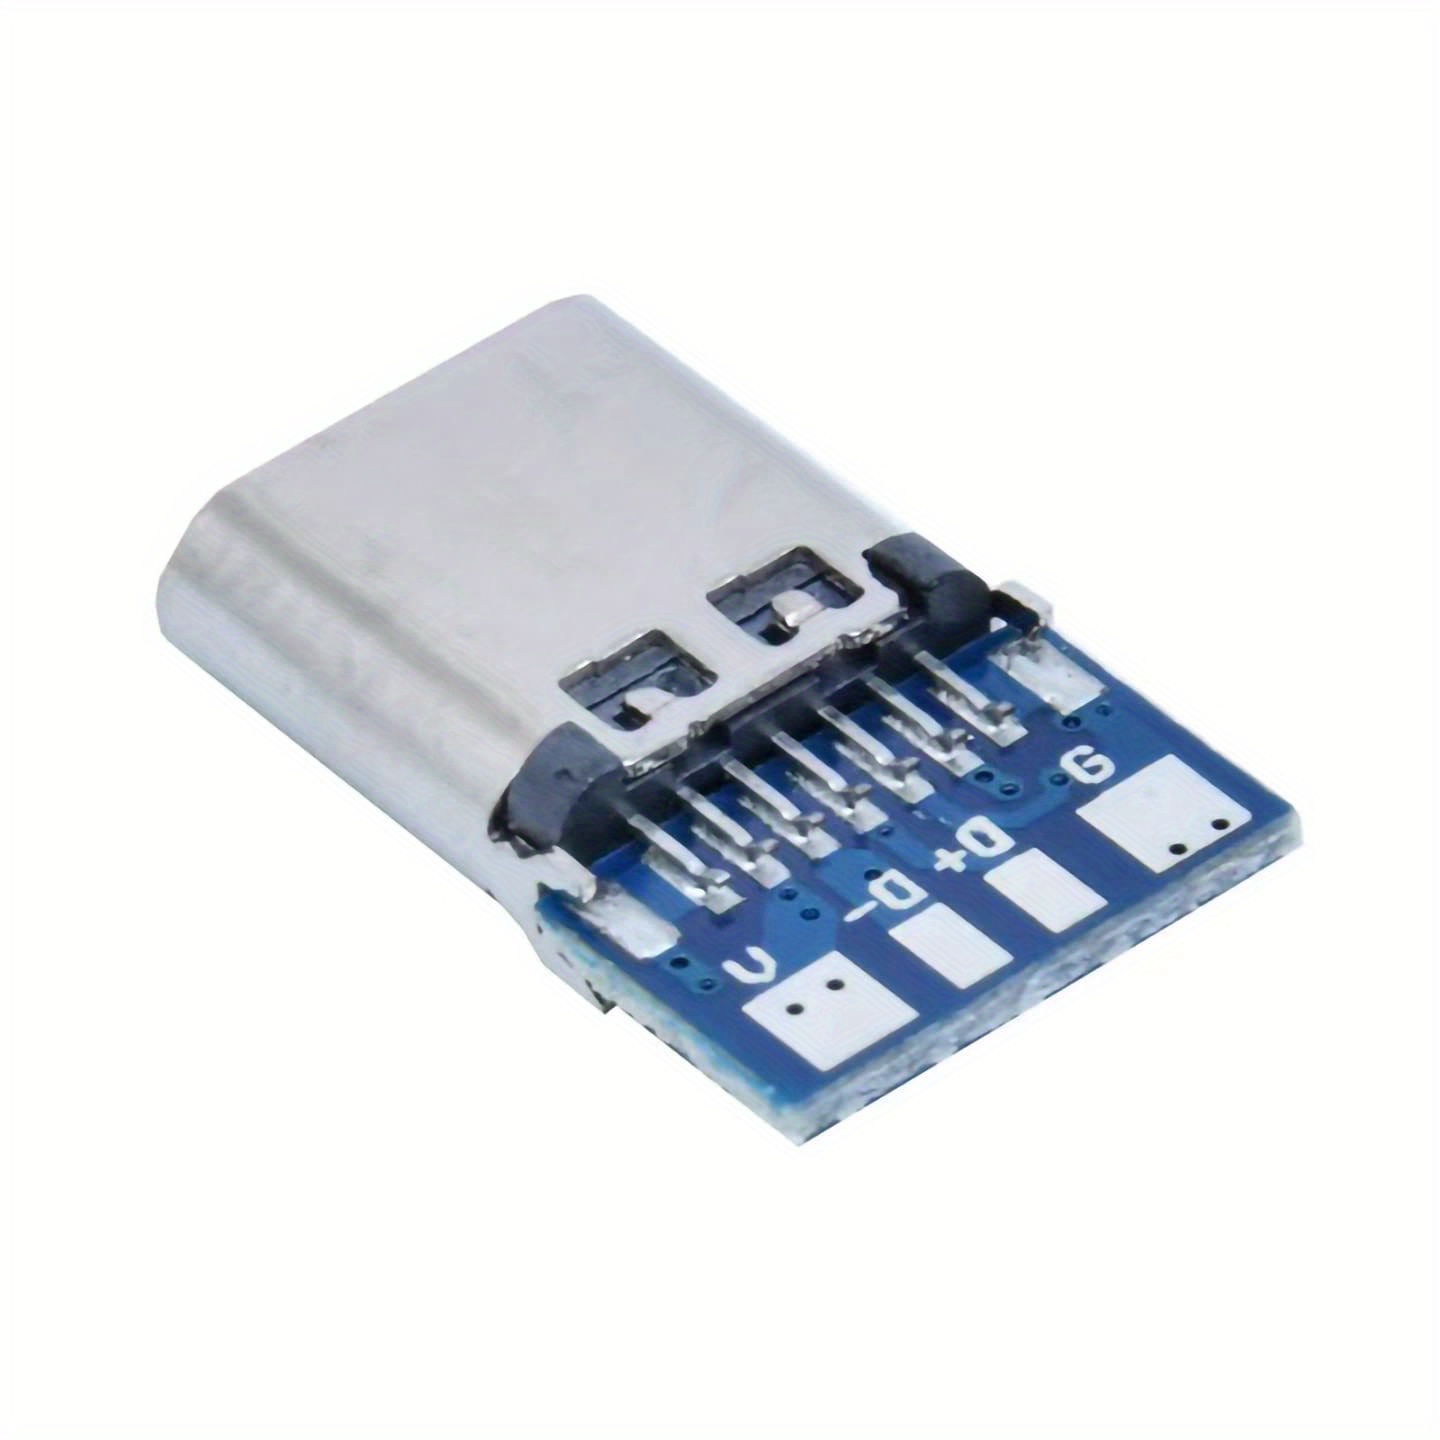 

5/10pcs Usb 3.1 Type-c Connector 24 Pins Female Plug Socket Receptacle Adapter To Solder Wire & Cable 24p Pcb Board Support Module